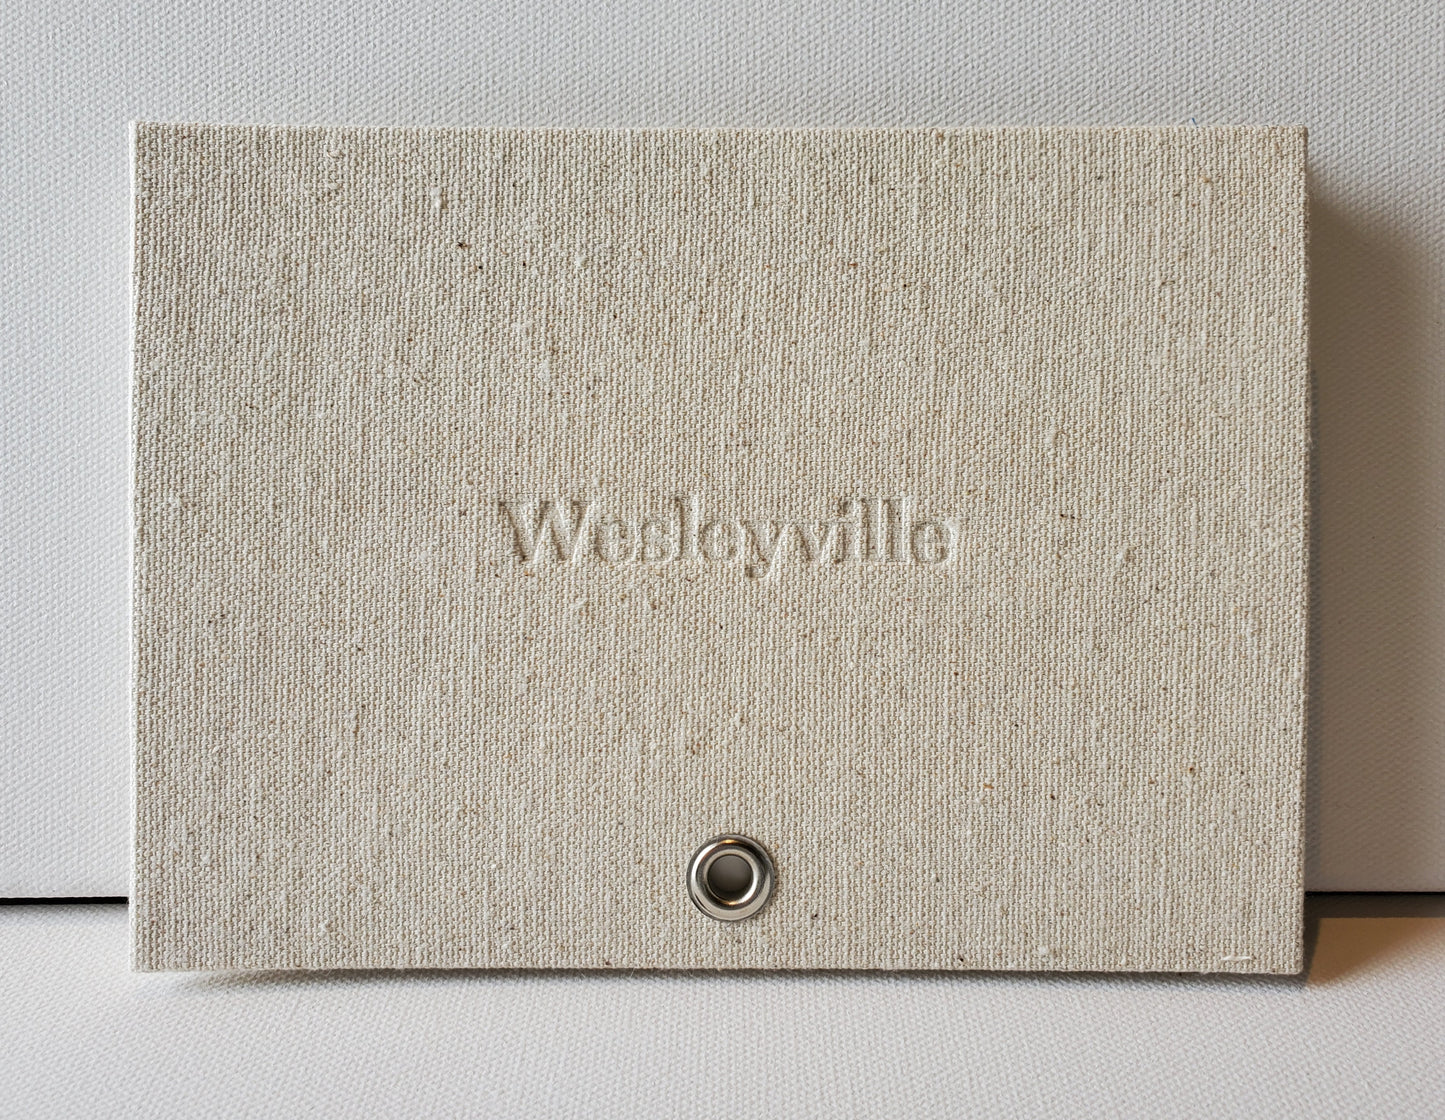 Wesleyville book front cover: sailcloth & grommet